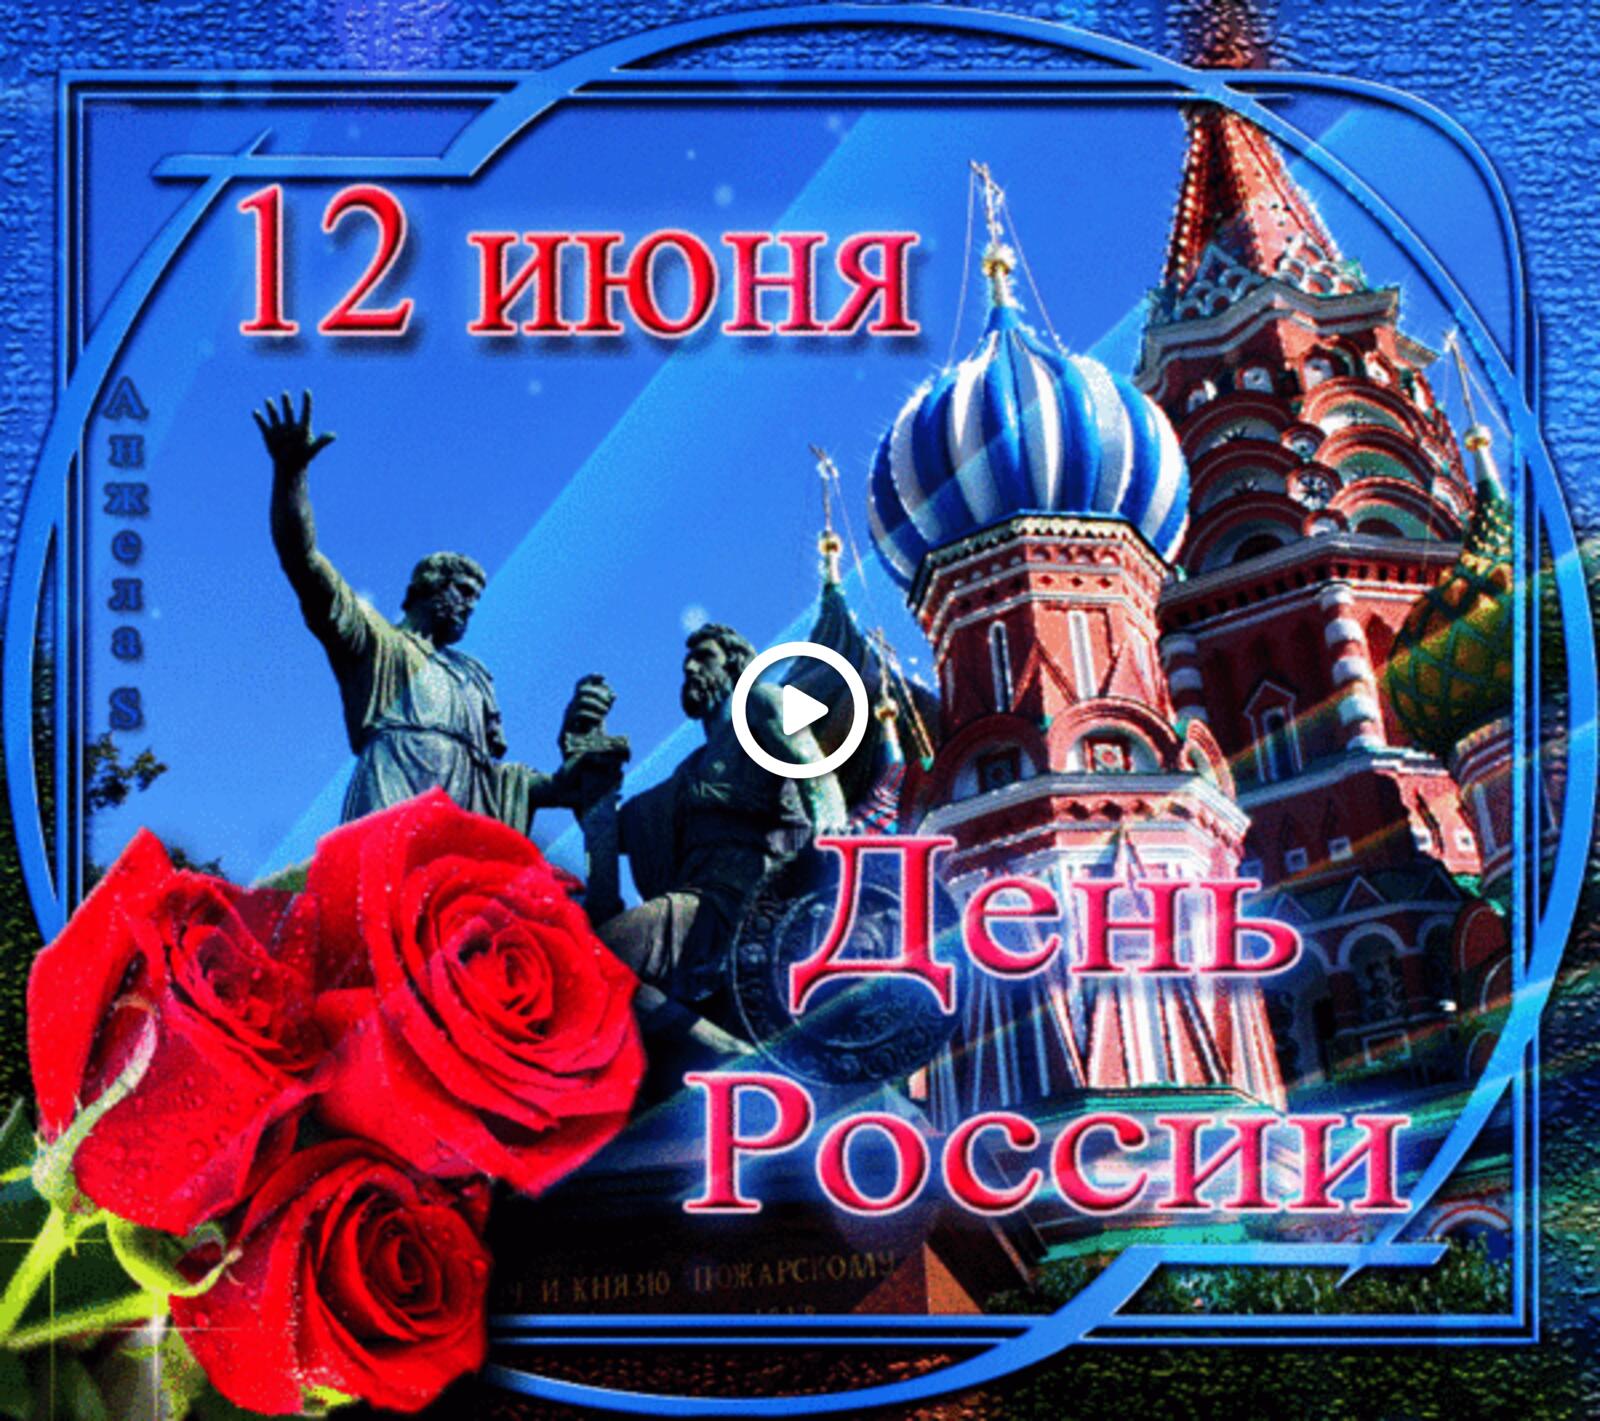 Postcard on Russia Day